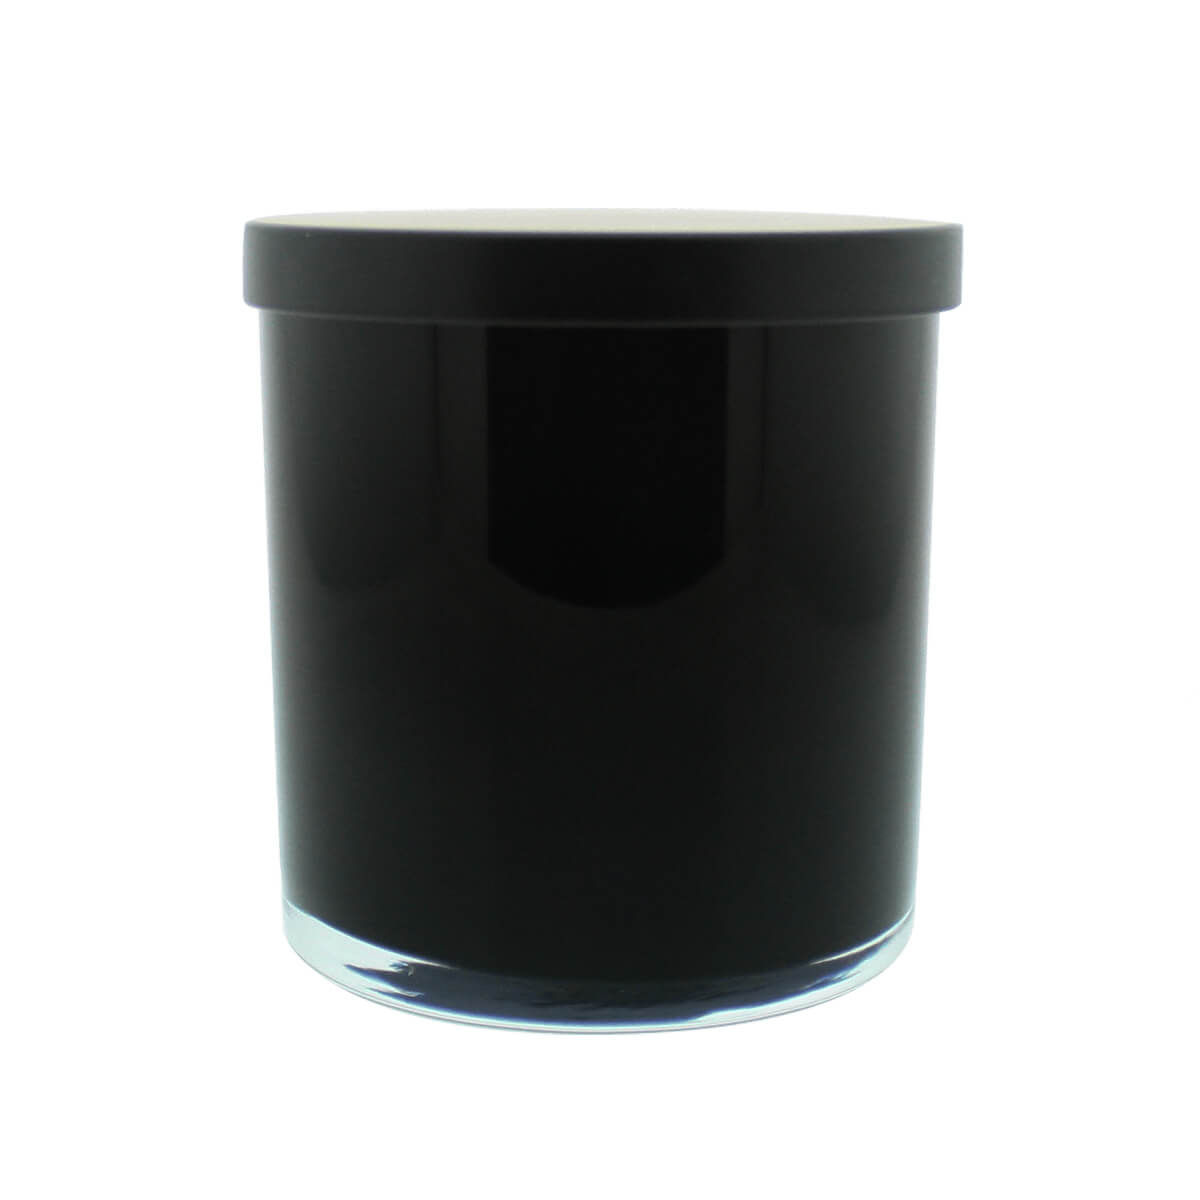 A Black Glass Tumbler Photo Candle with a lid on a white background.